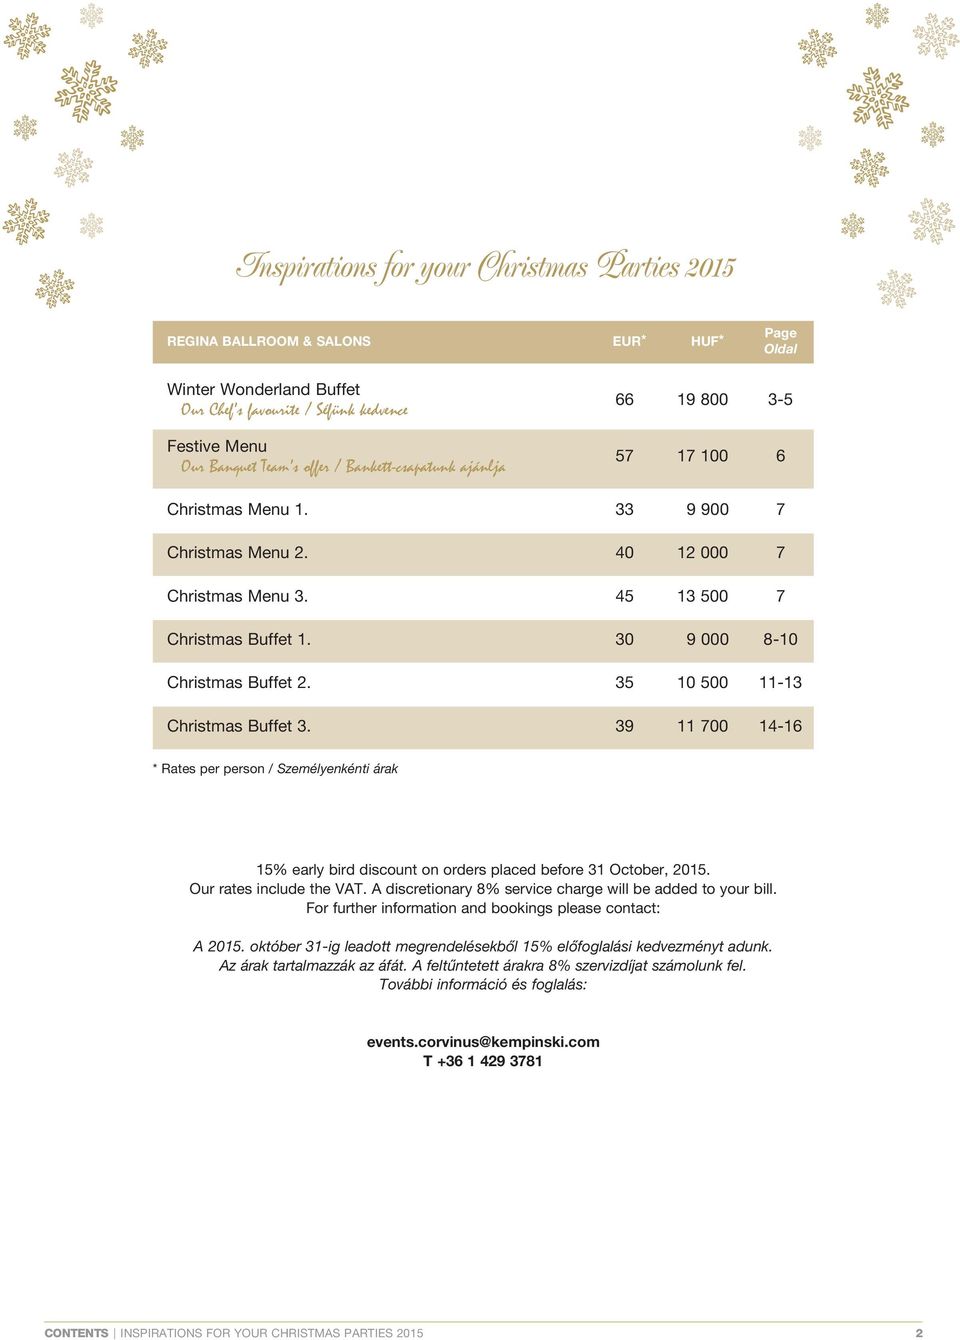 35 10 500 11-13 Christmas Buffet 3. 39 11 700 14-16 Rates per person / Személyenkénti árak 15% early bird discount on orders placed before 31 October, 2015. Our rates include the VAT.